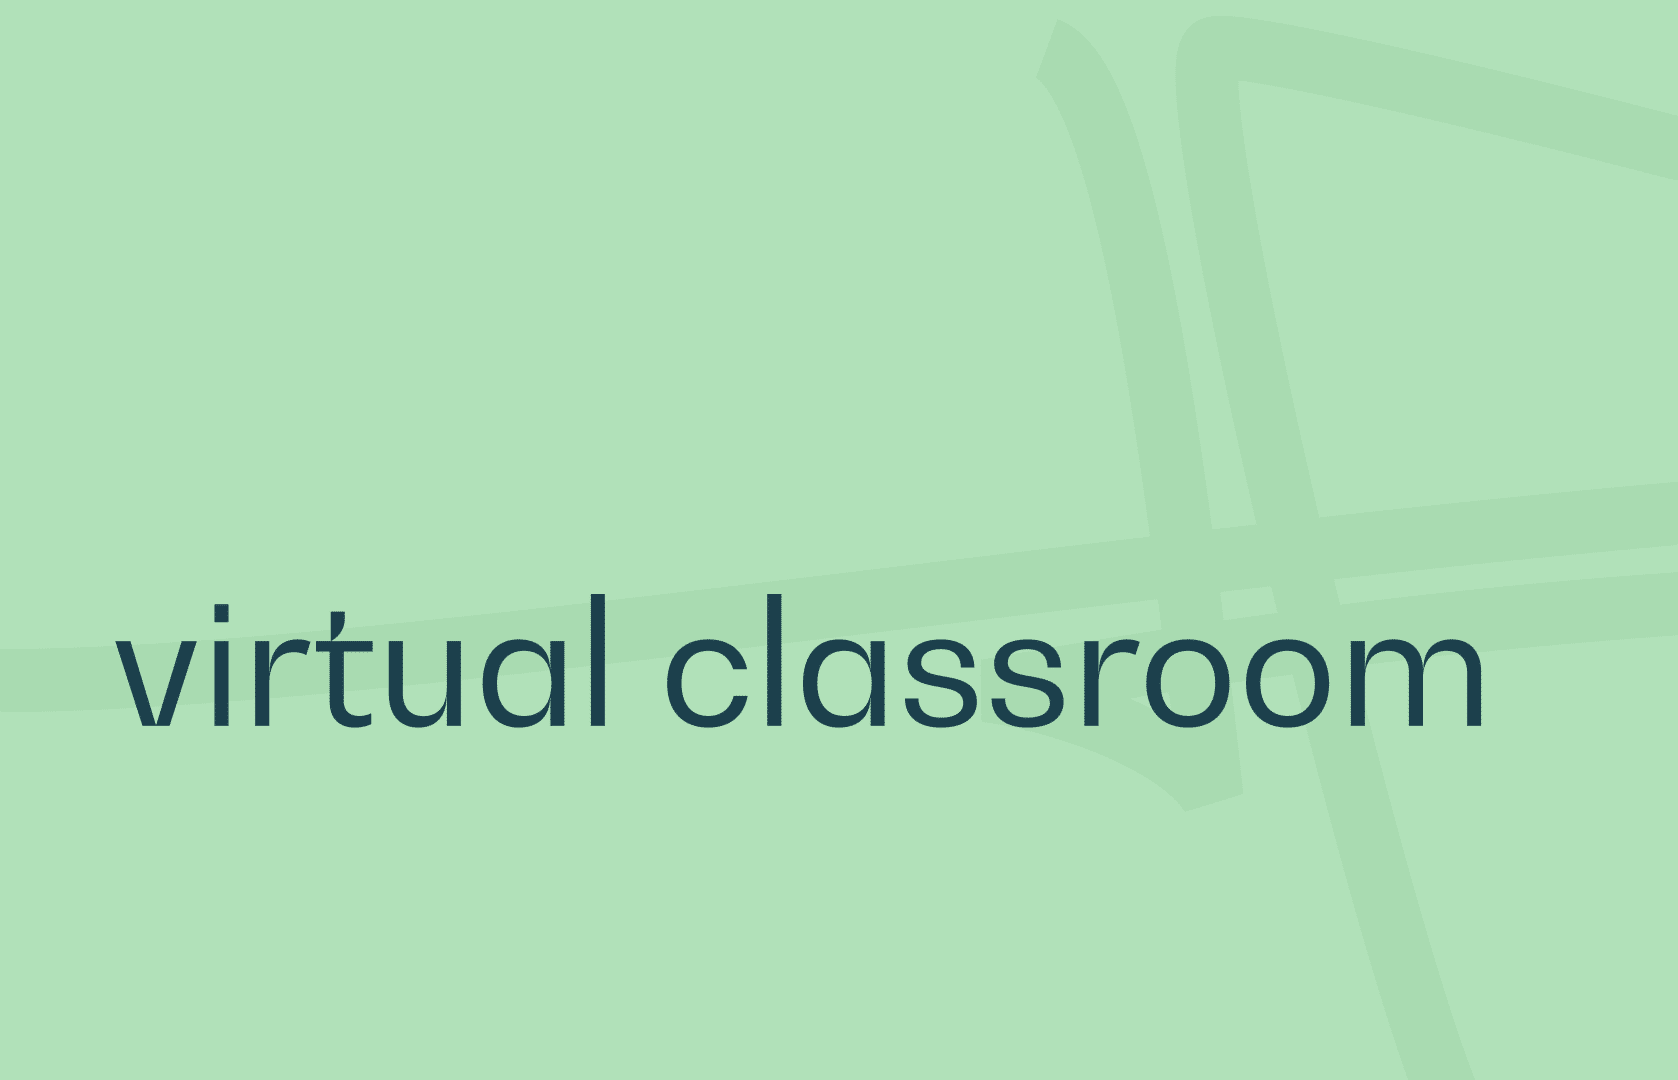 Virtual Classroom Definition and explanation